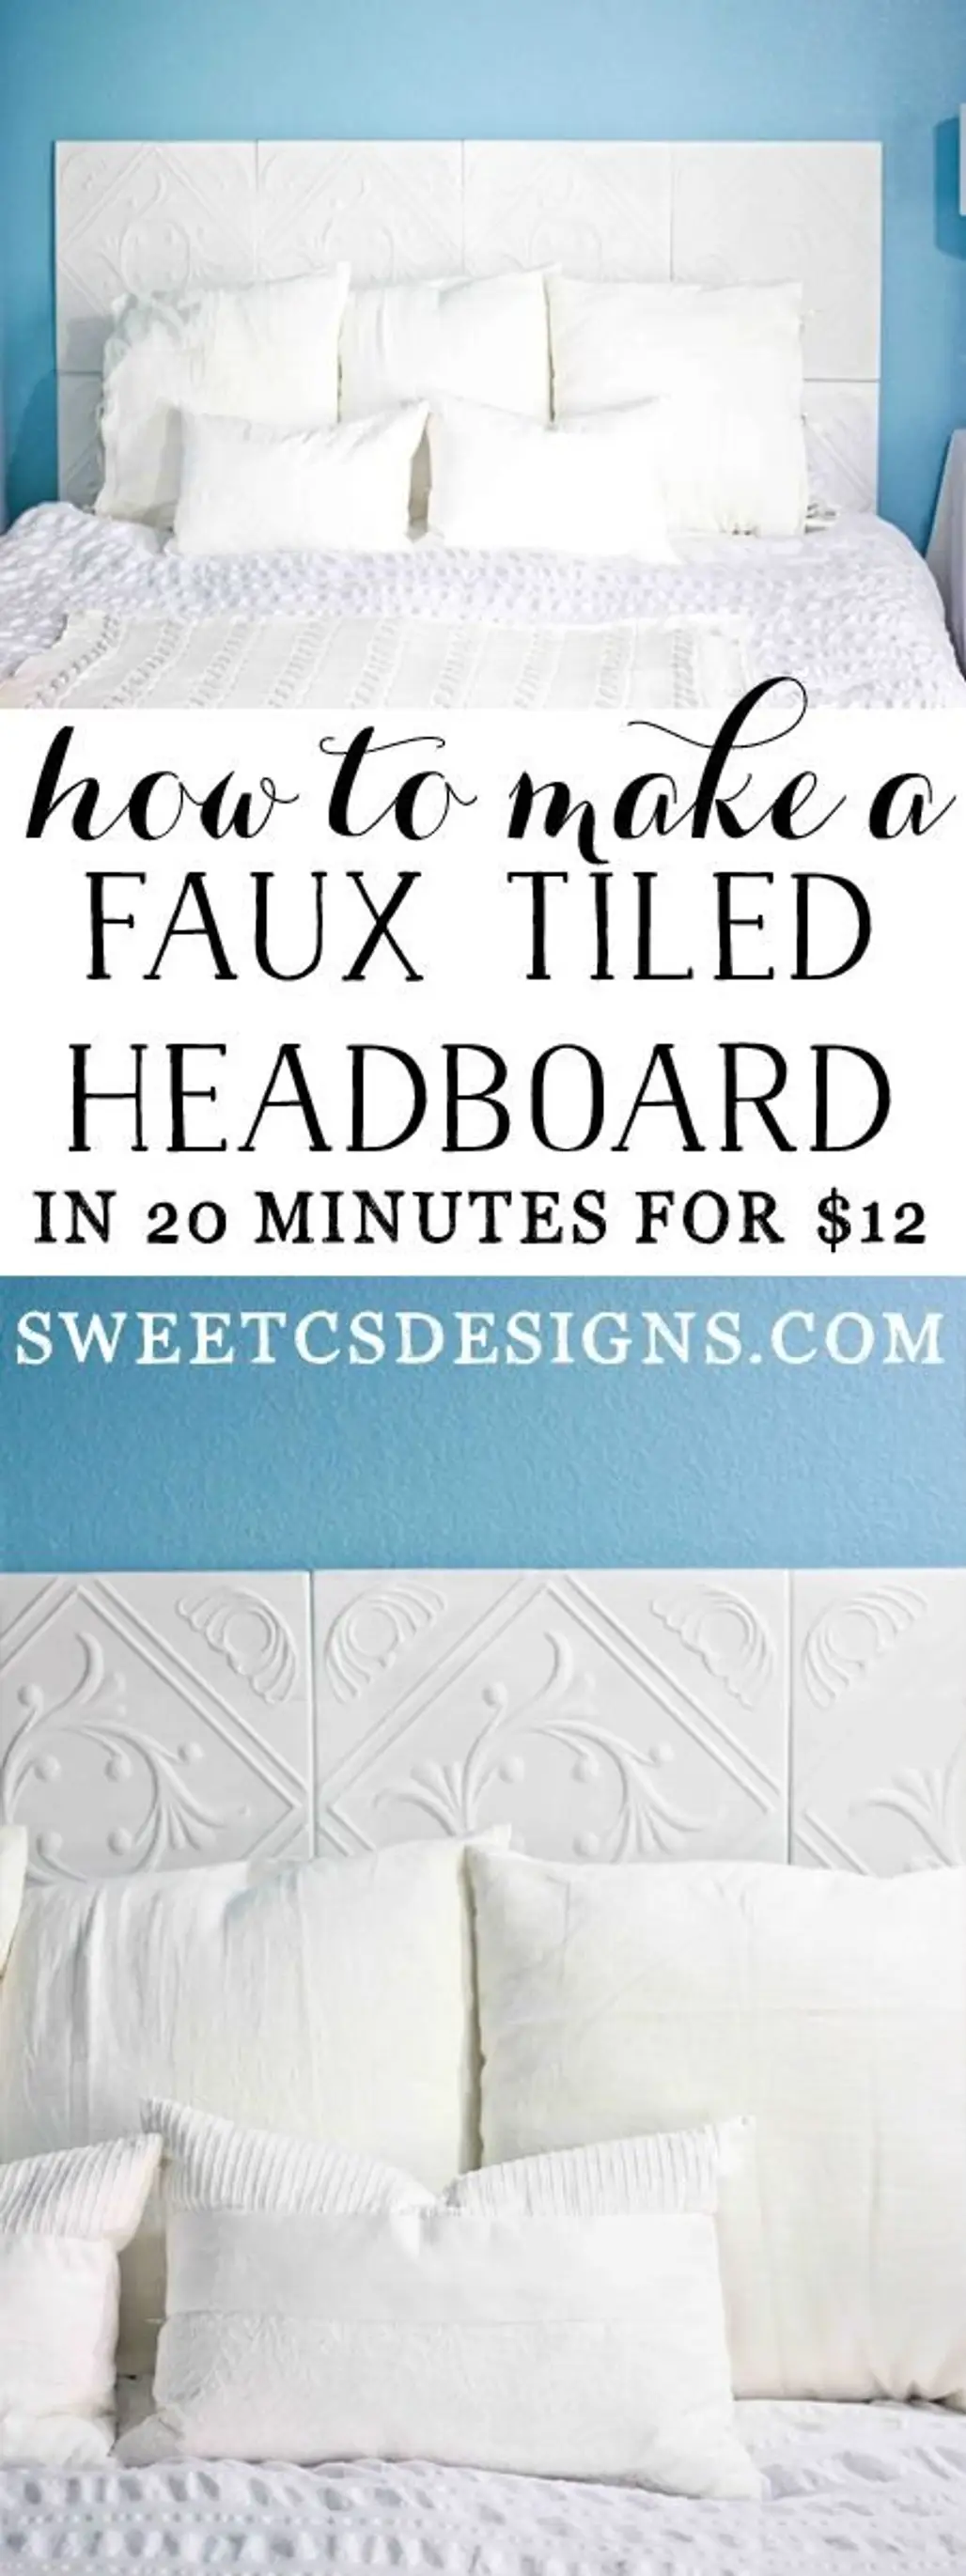 How to Make a Faux Tiled Headboard-